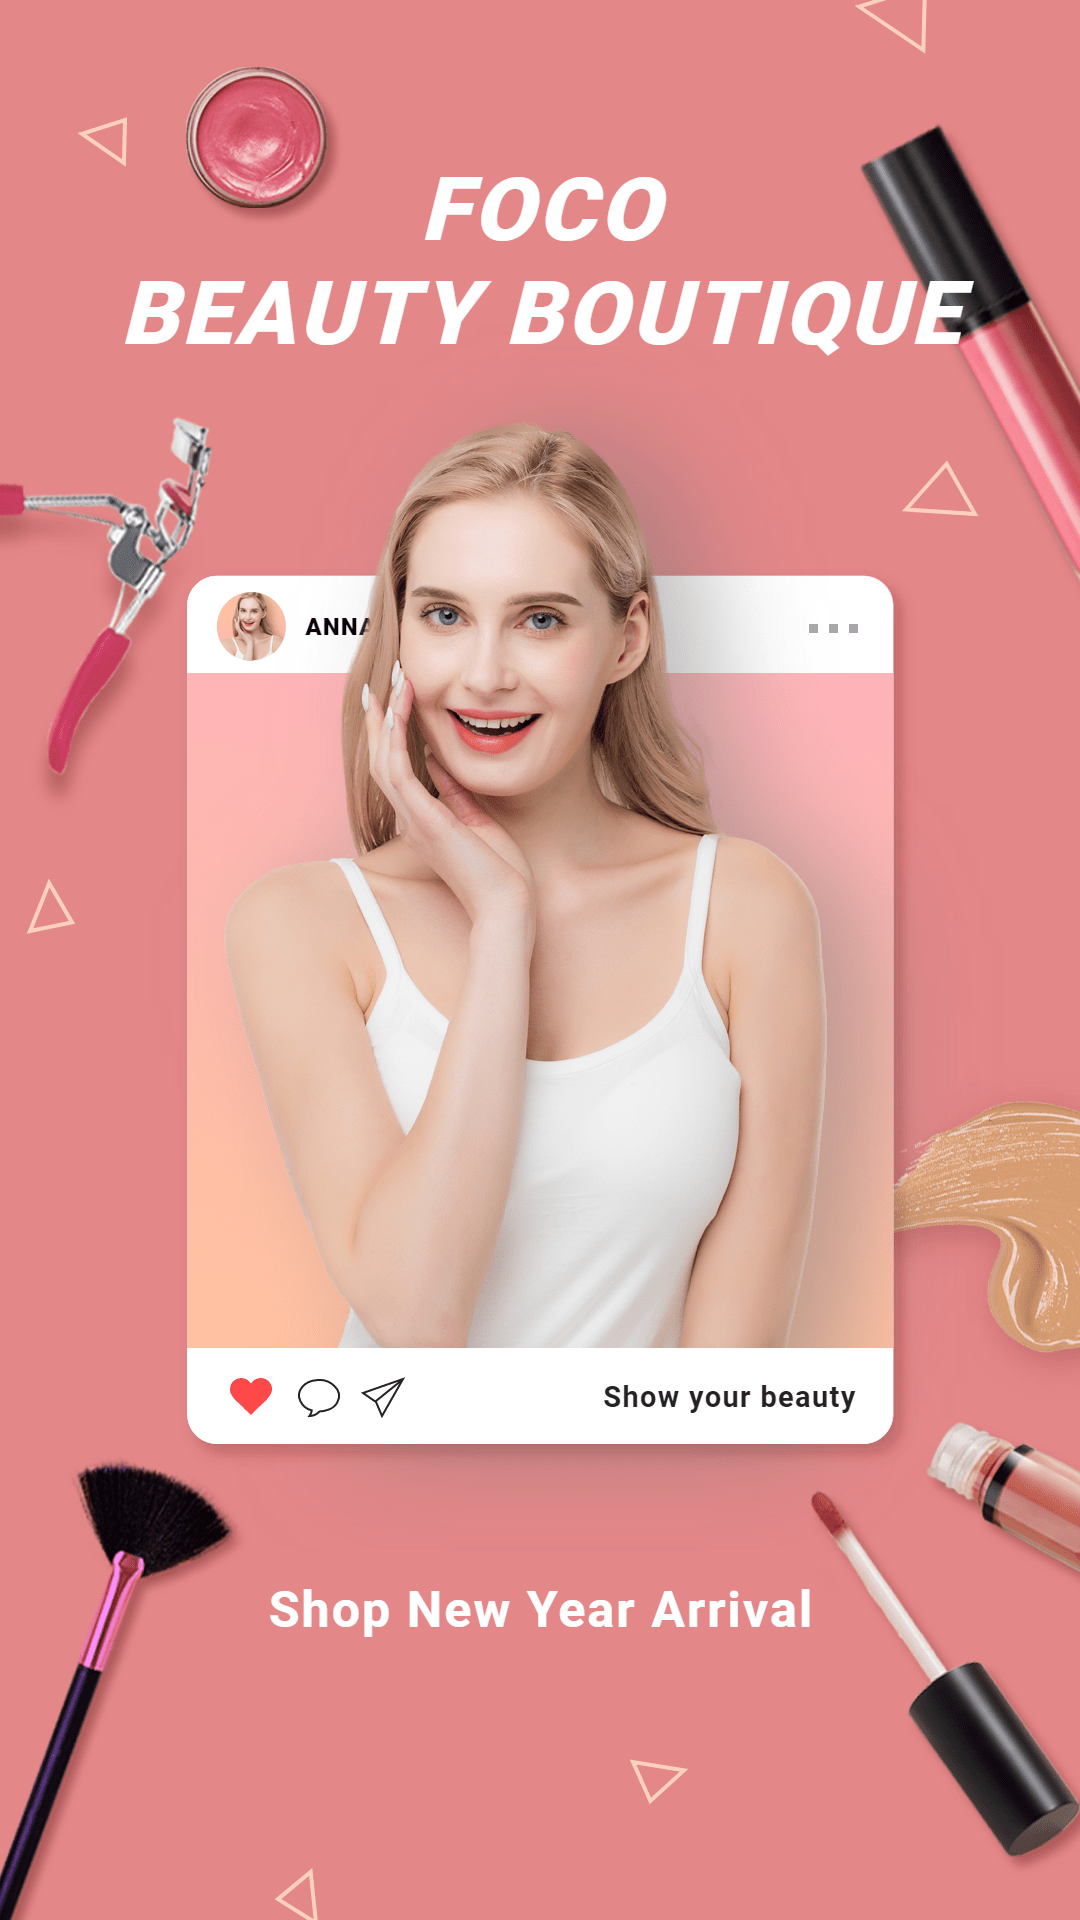 Creative Style Beauty Boutique Ecommerce Story预览效果